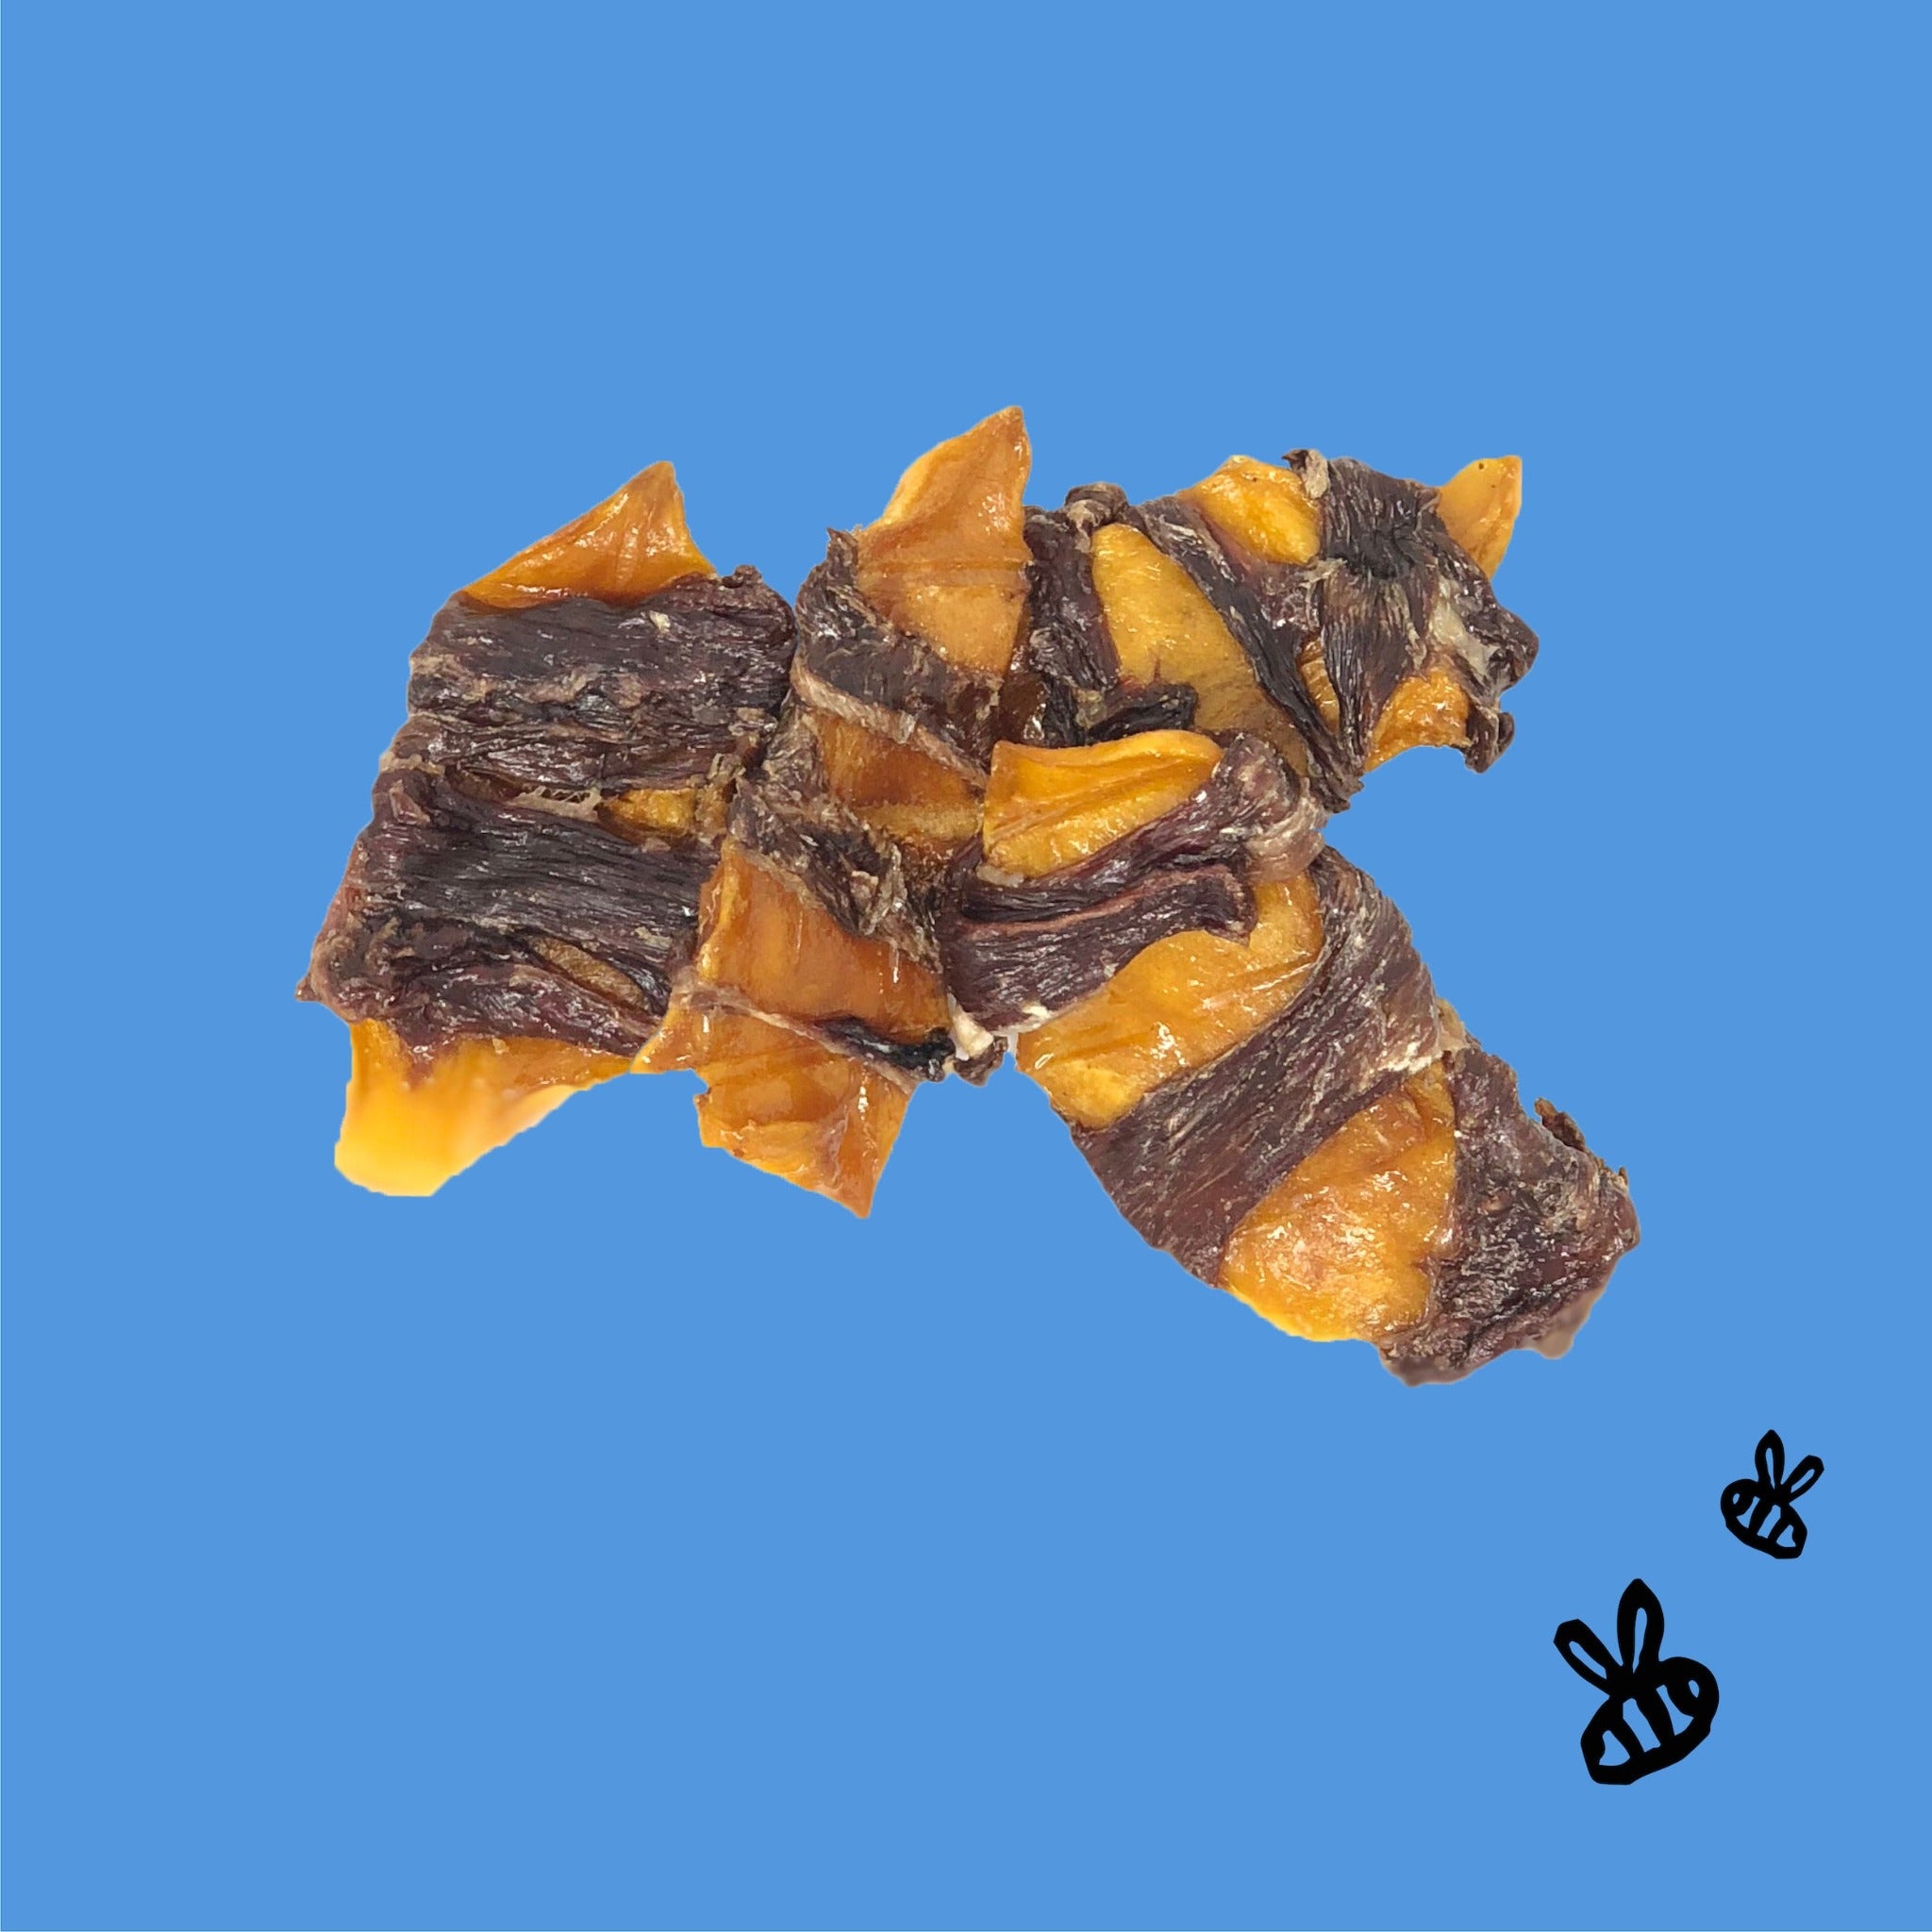 four pieces of mango wrapped in buffalo jerky on a blue background, two black bees on bottom right